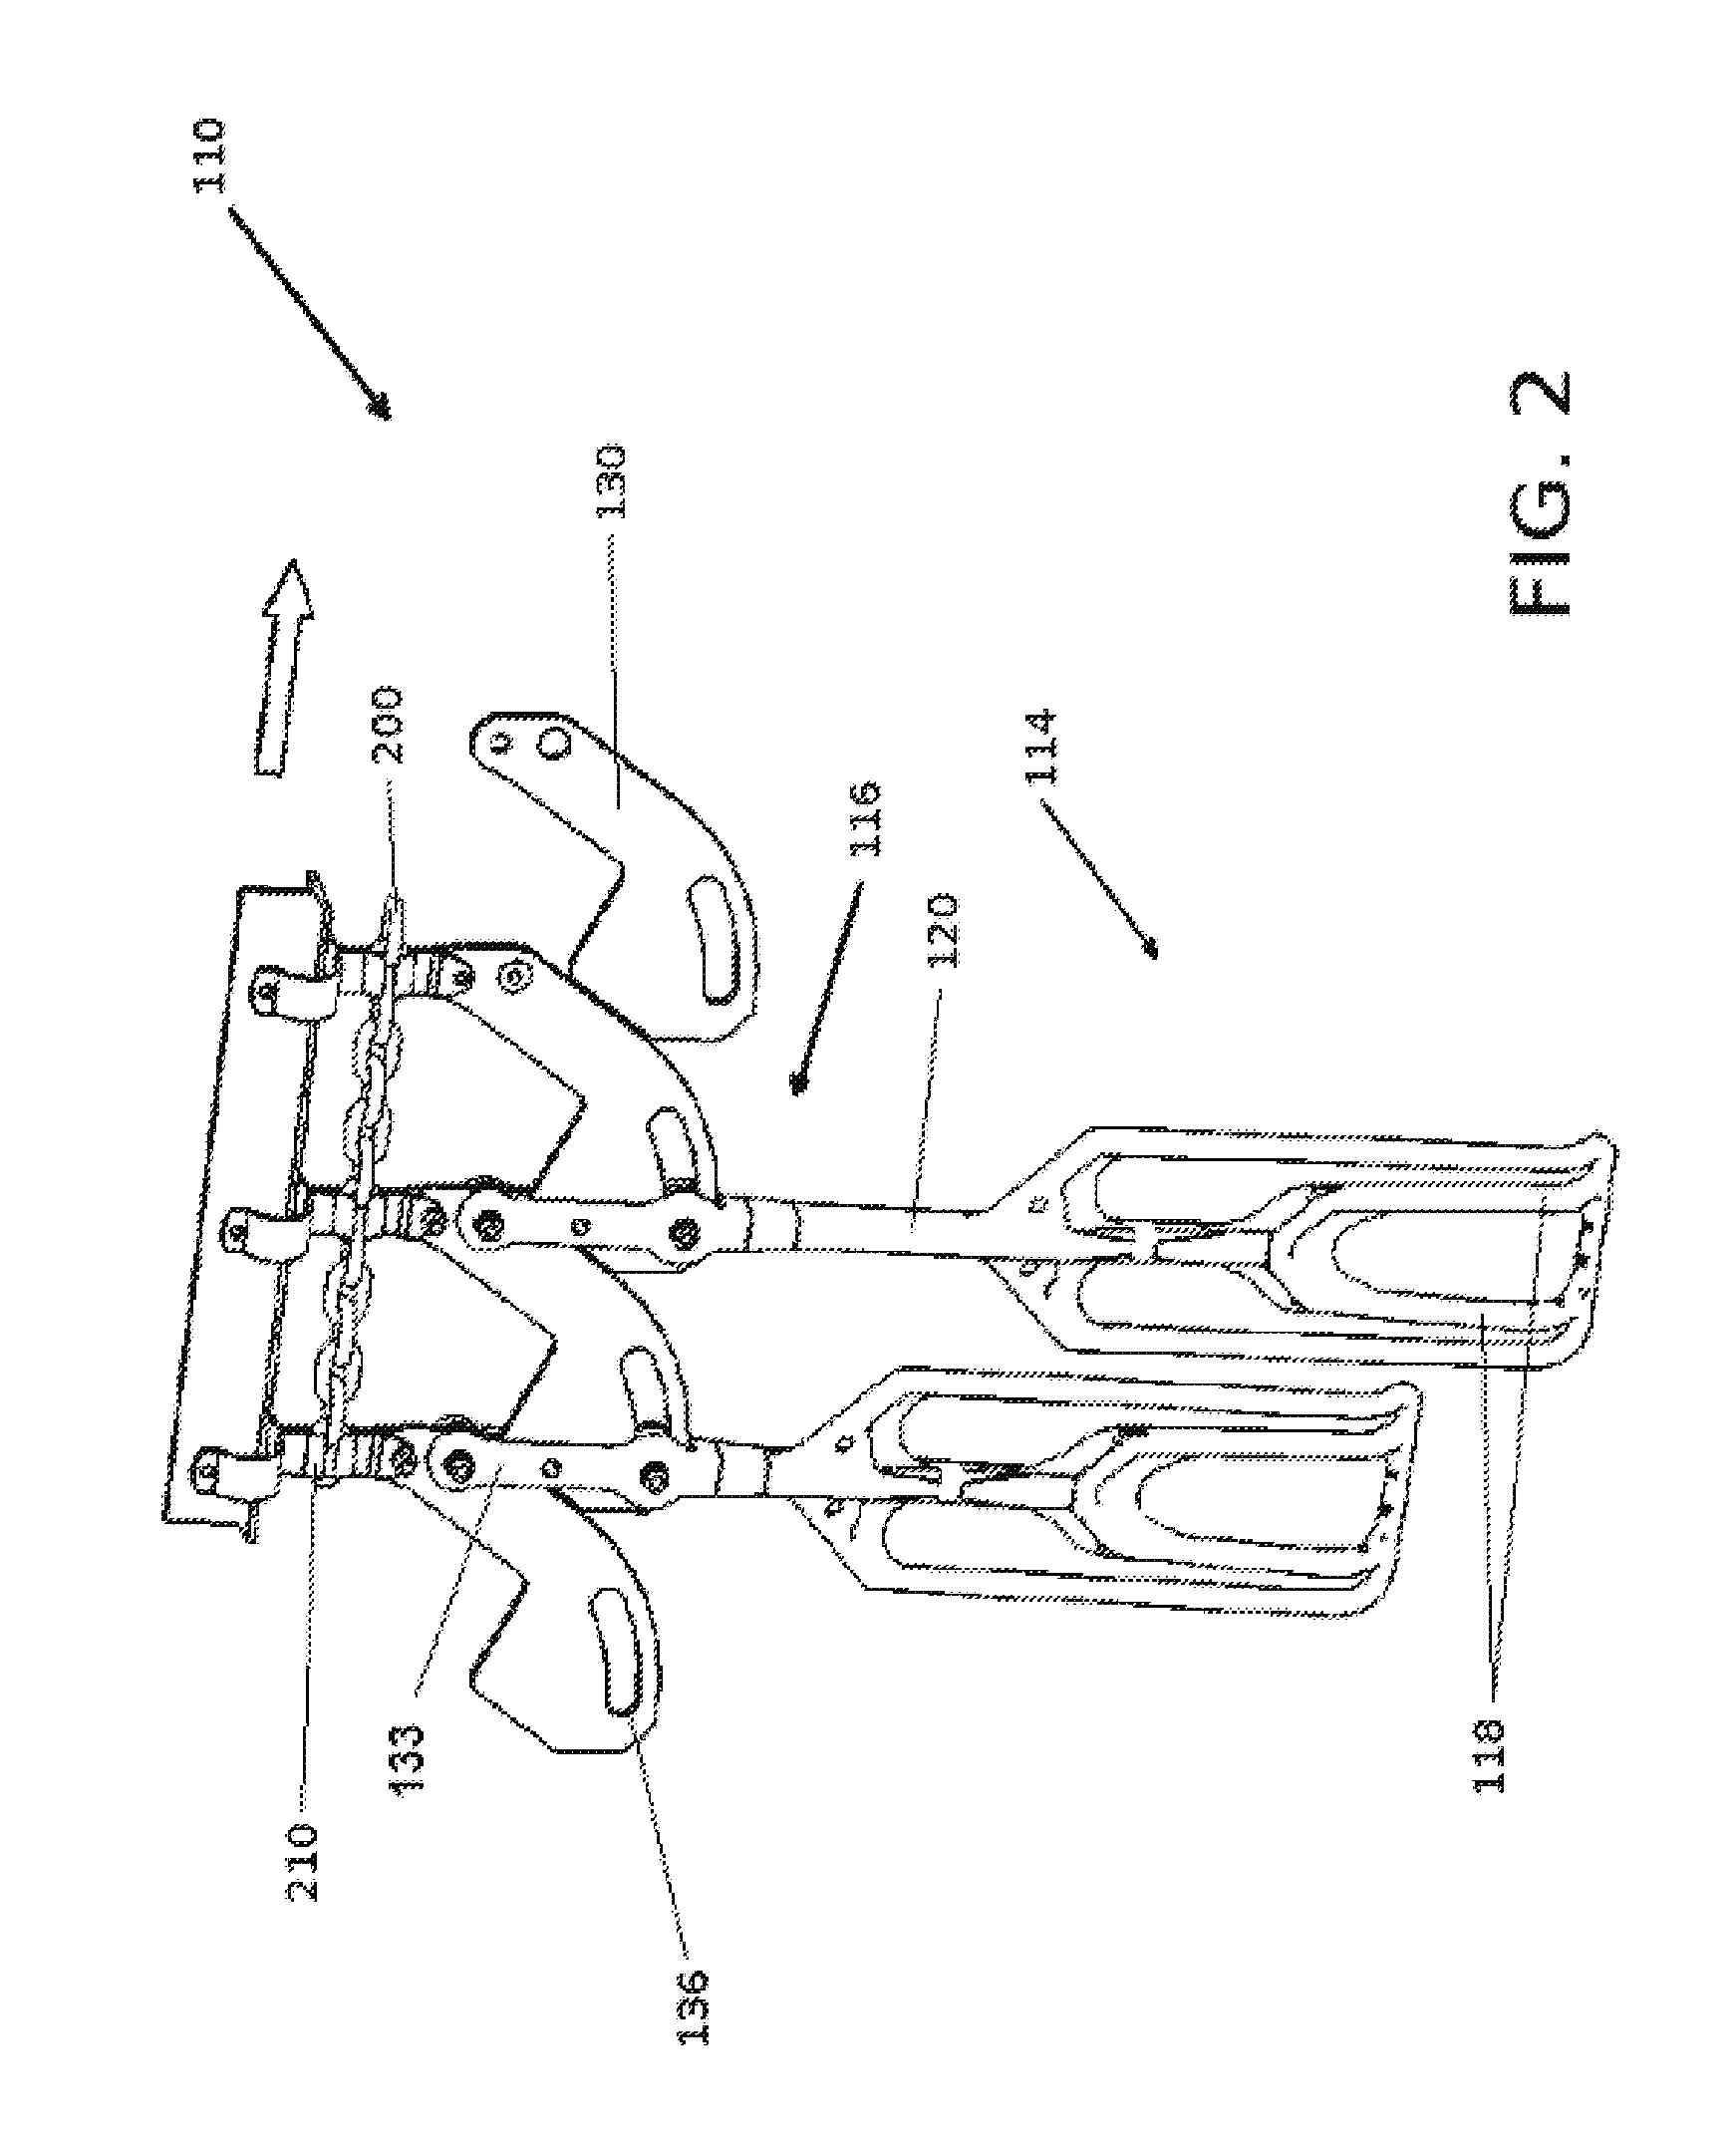 Shackle with pivot feature and log chain drive mechanism